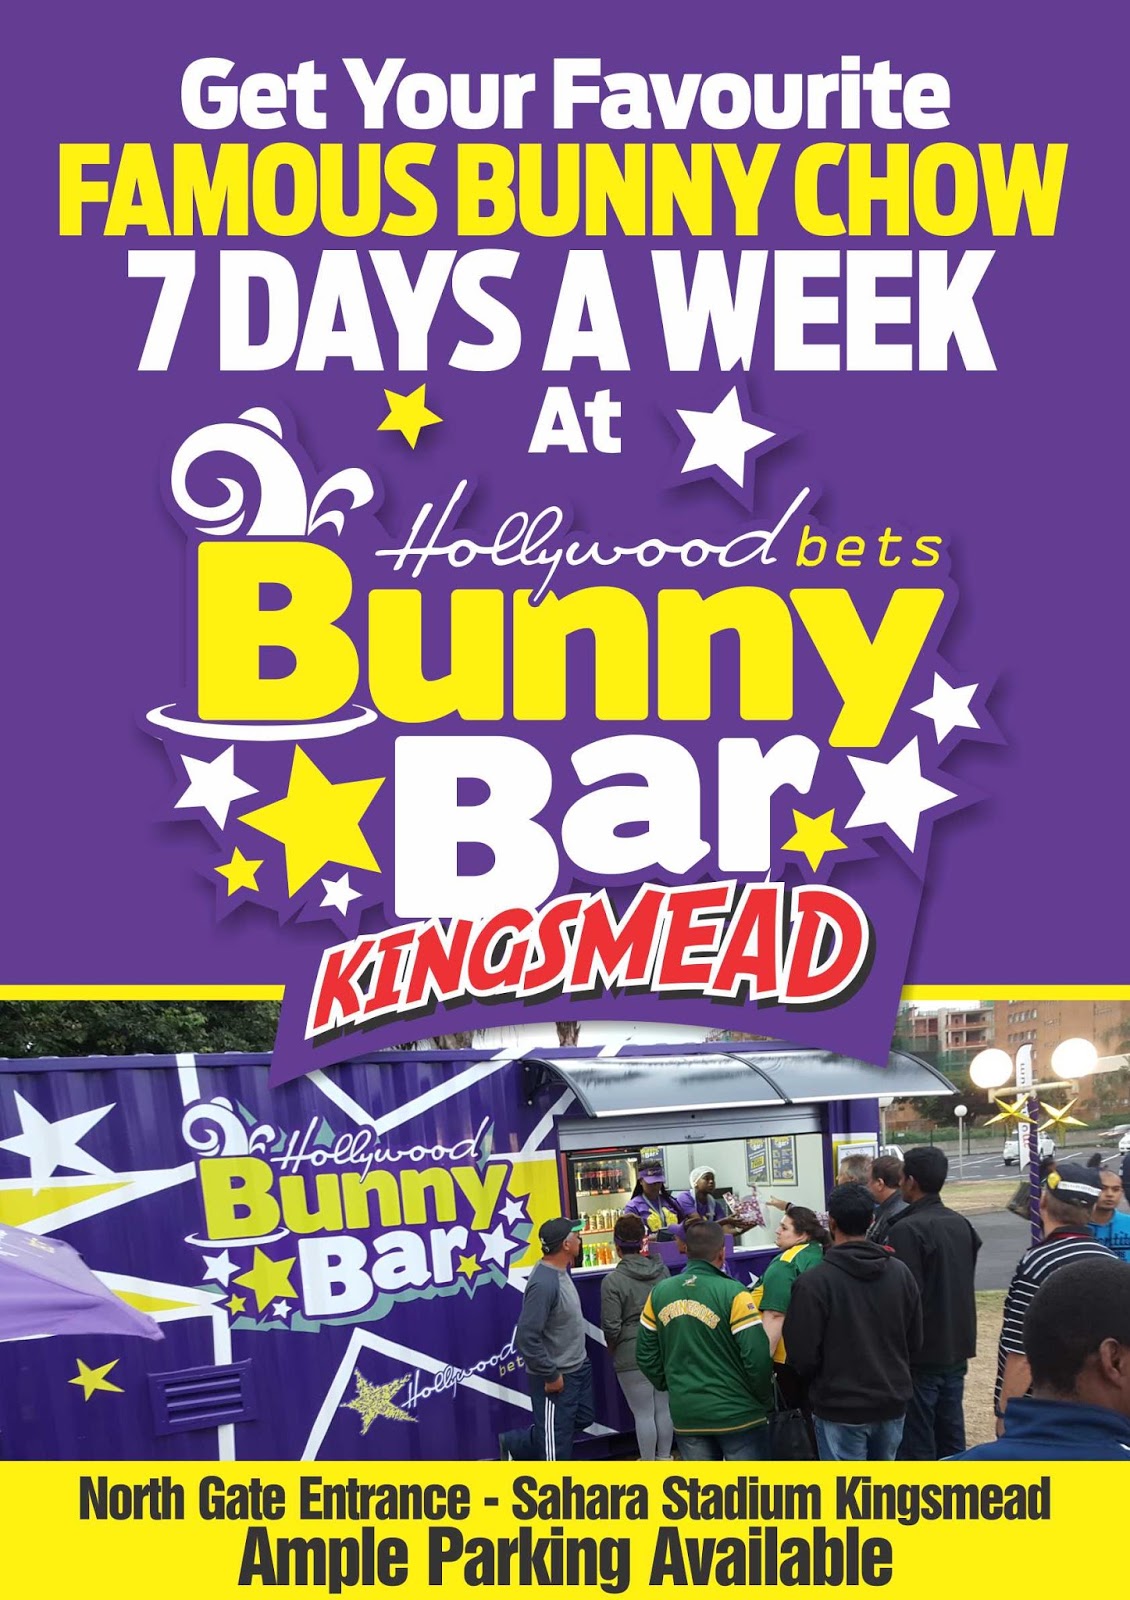 Get your favourite famous bunny chow 7 days a week at Hollywood Bunny Bar at Kingsmead